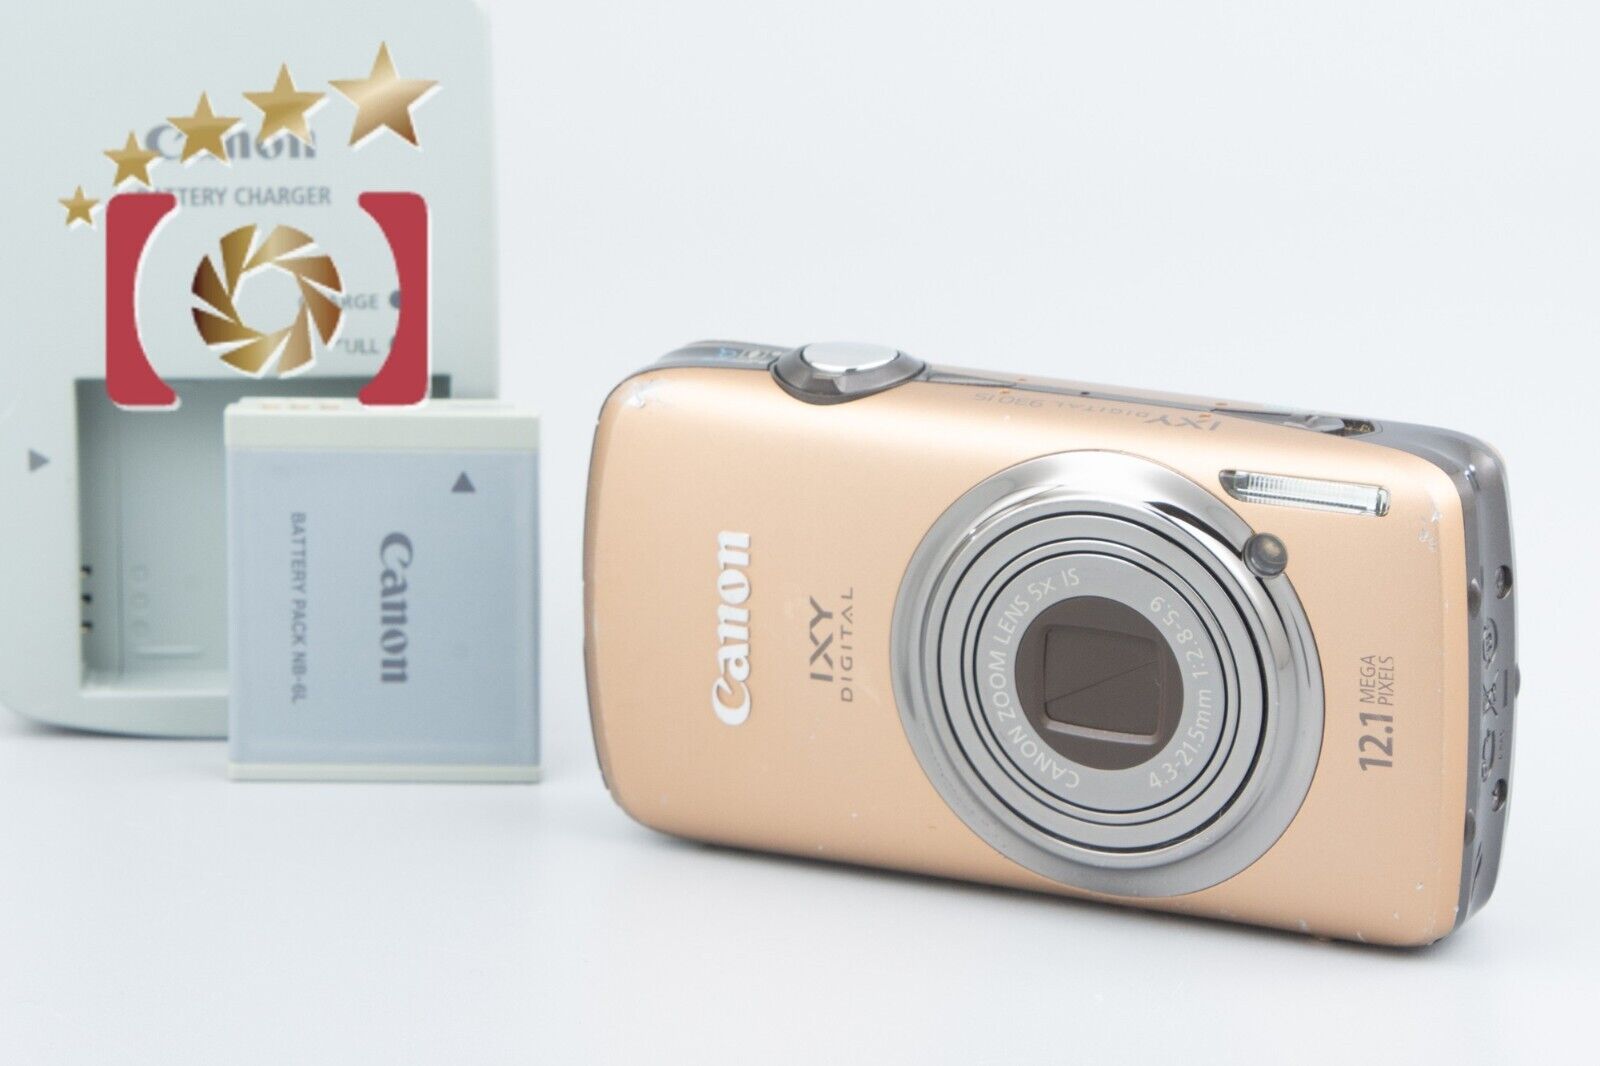 "As-Is" Canon IXY Digital 930 IS Brown 12.1 MP Digital Camera